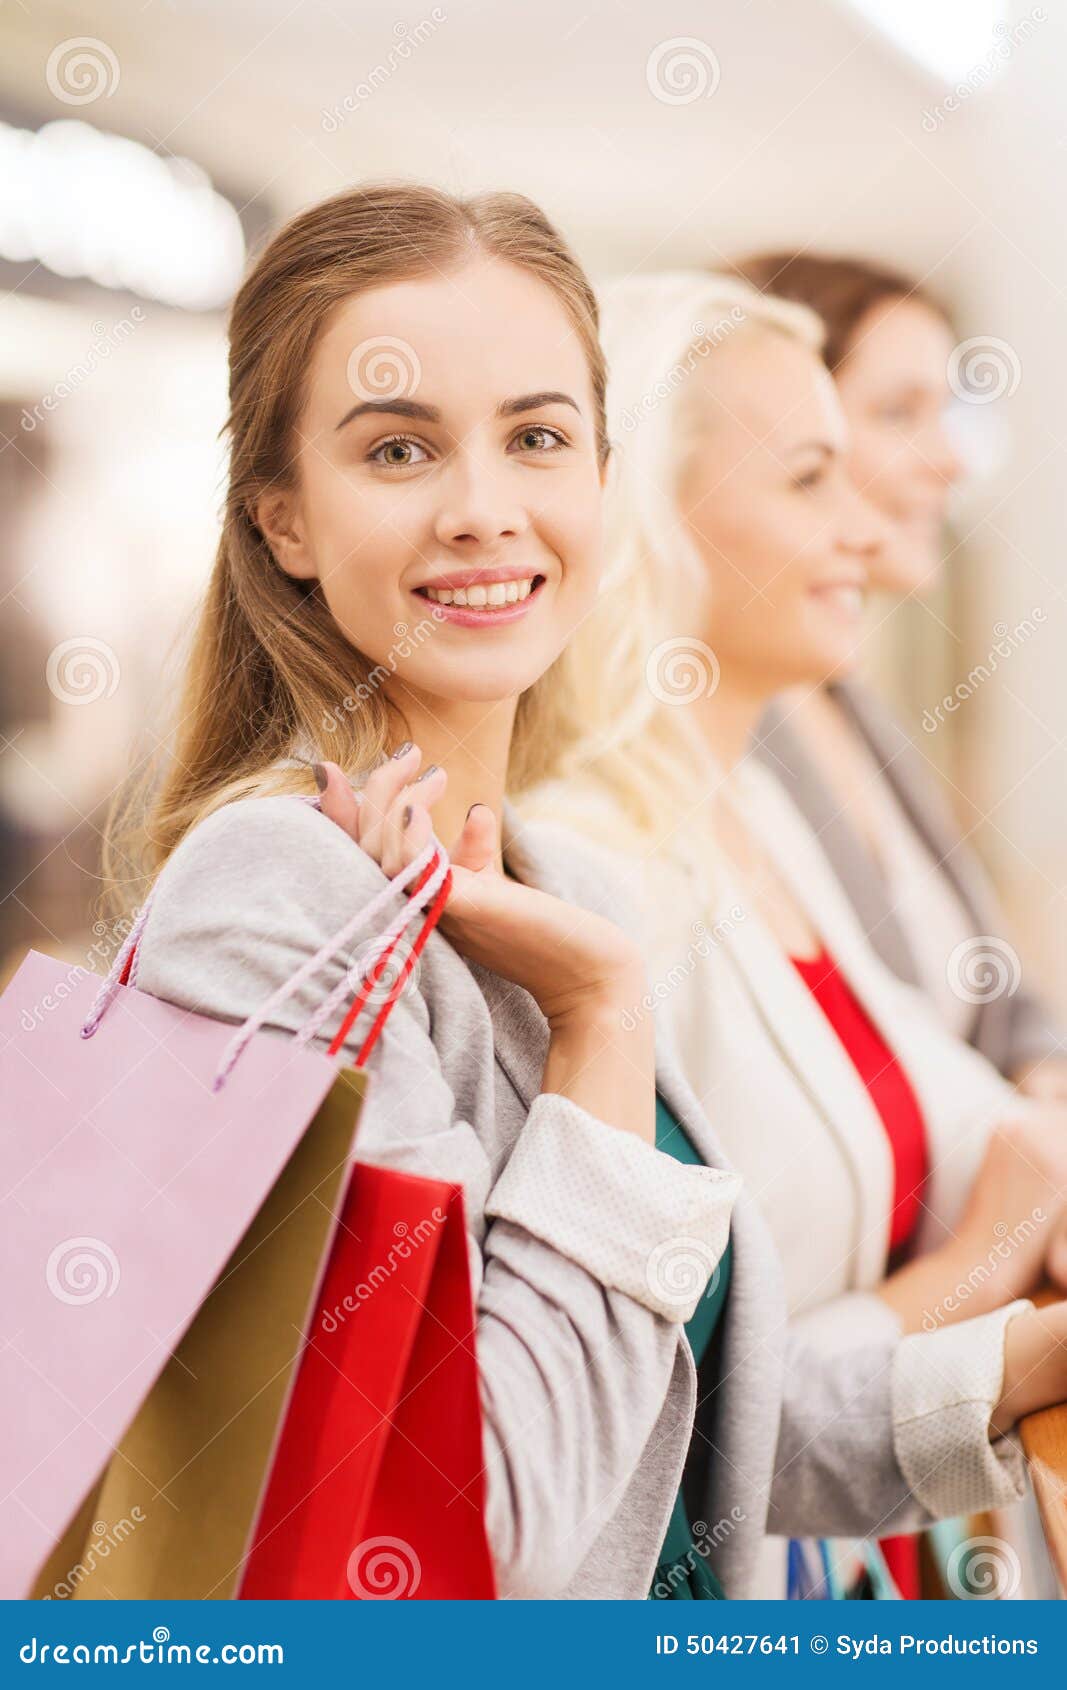 Happy Young Women with Shopping Bags in Mall Stock Image - Image of ...